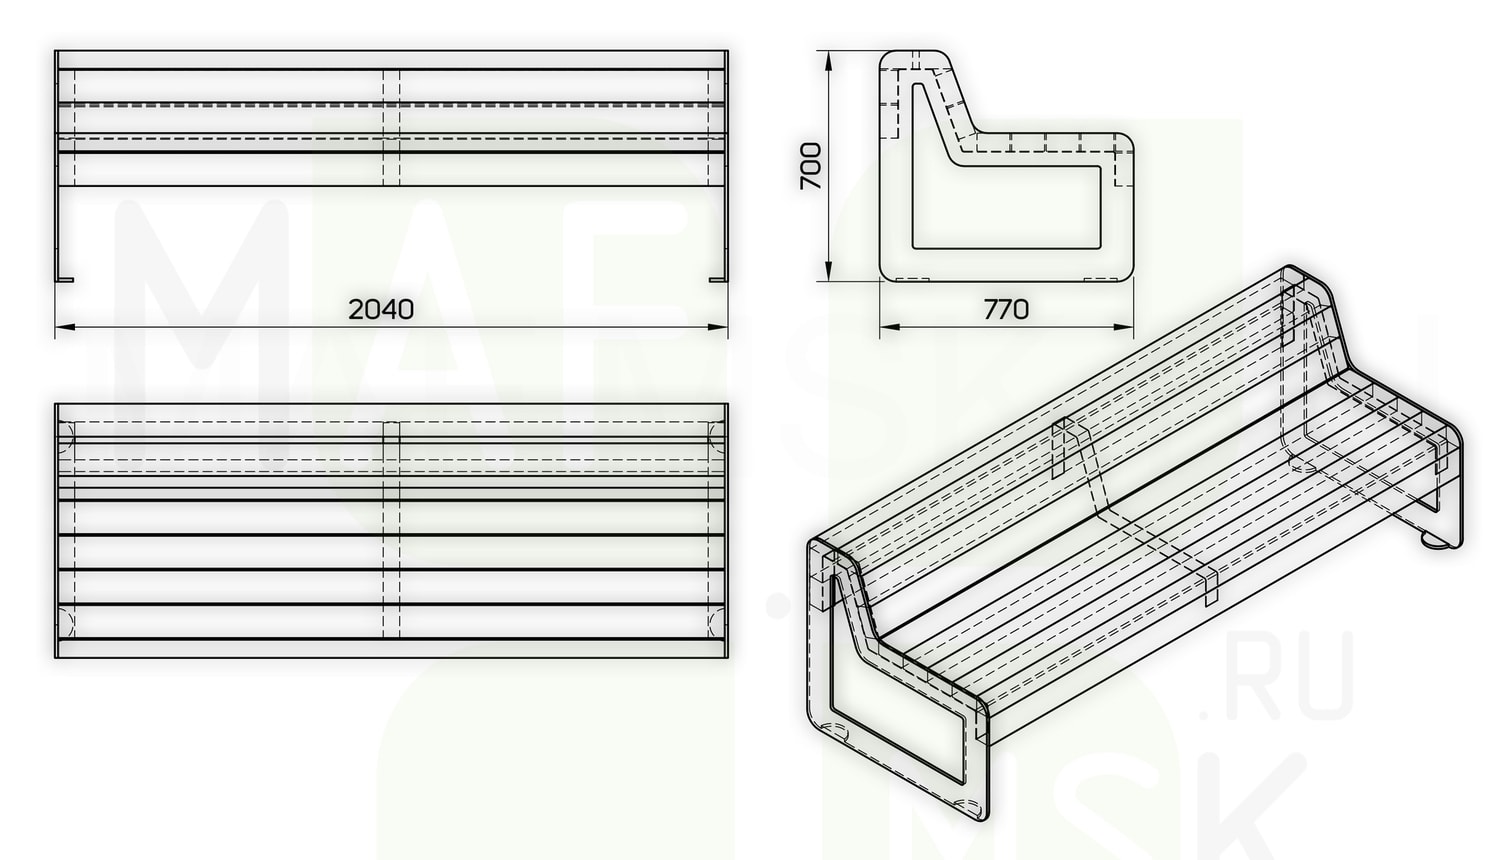 Gamme limitless bench 1 drawing